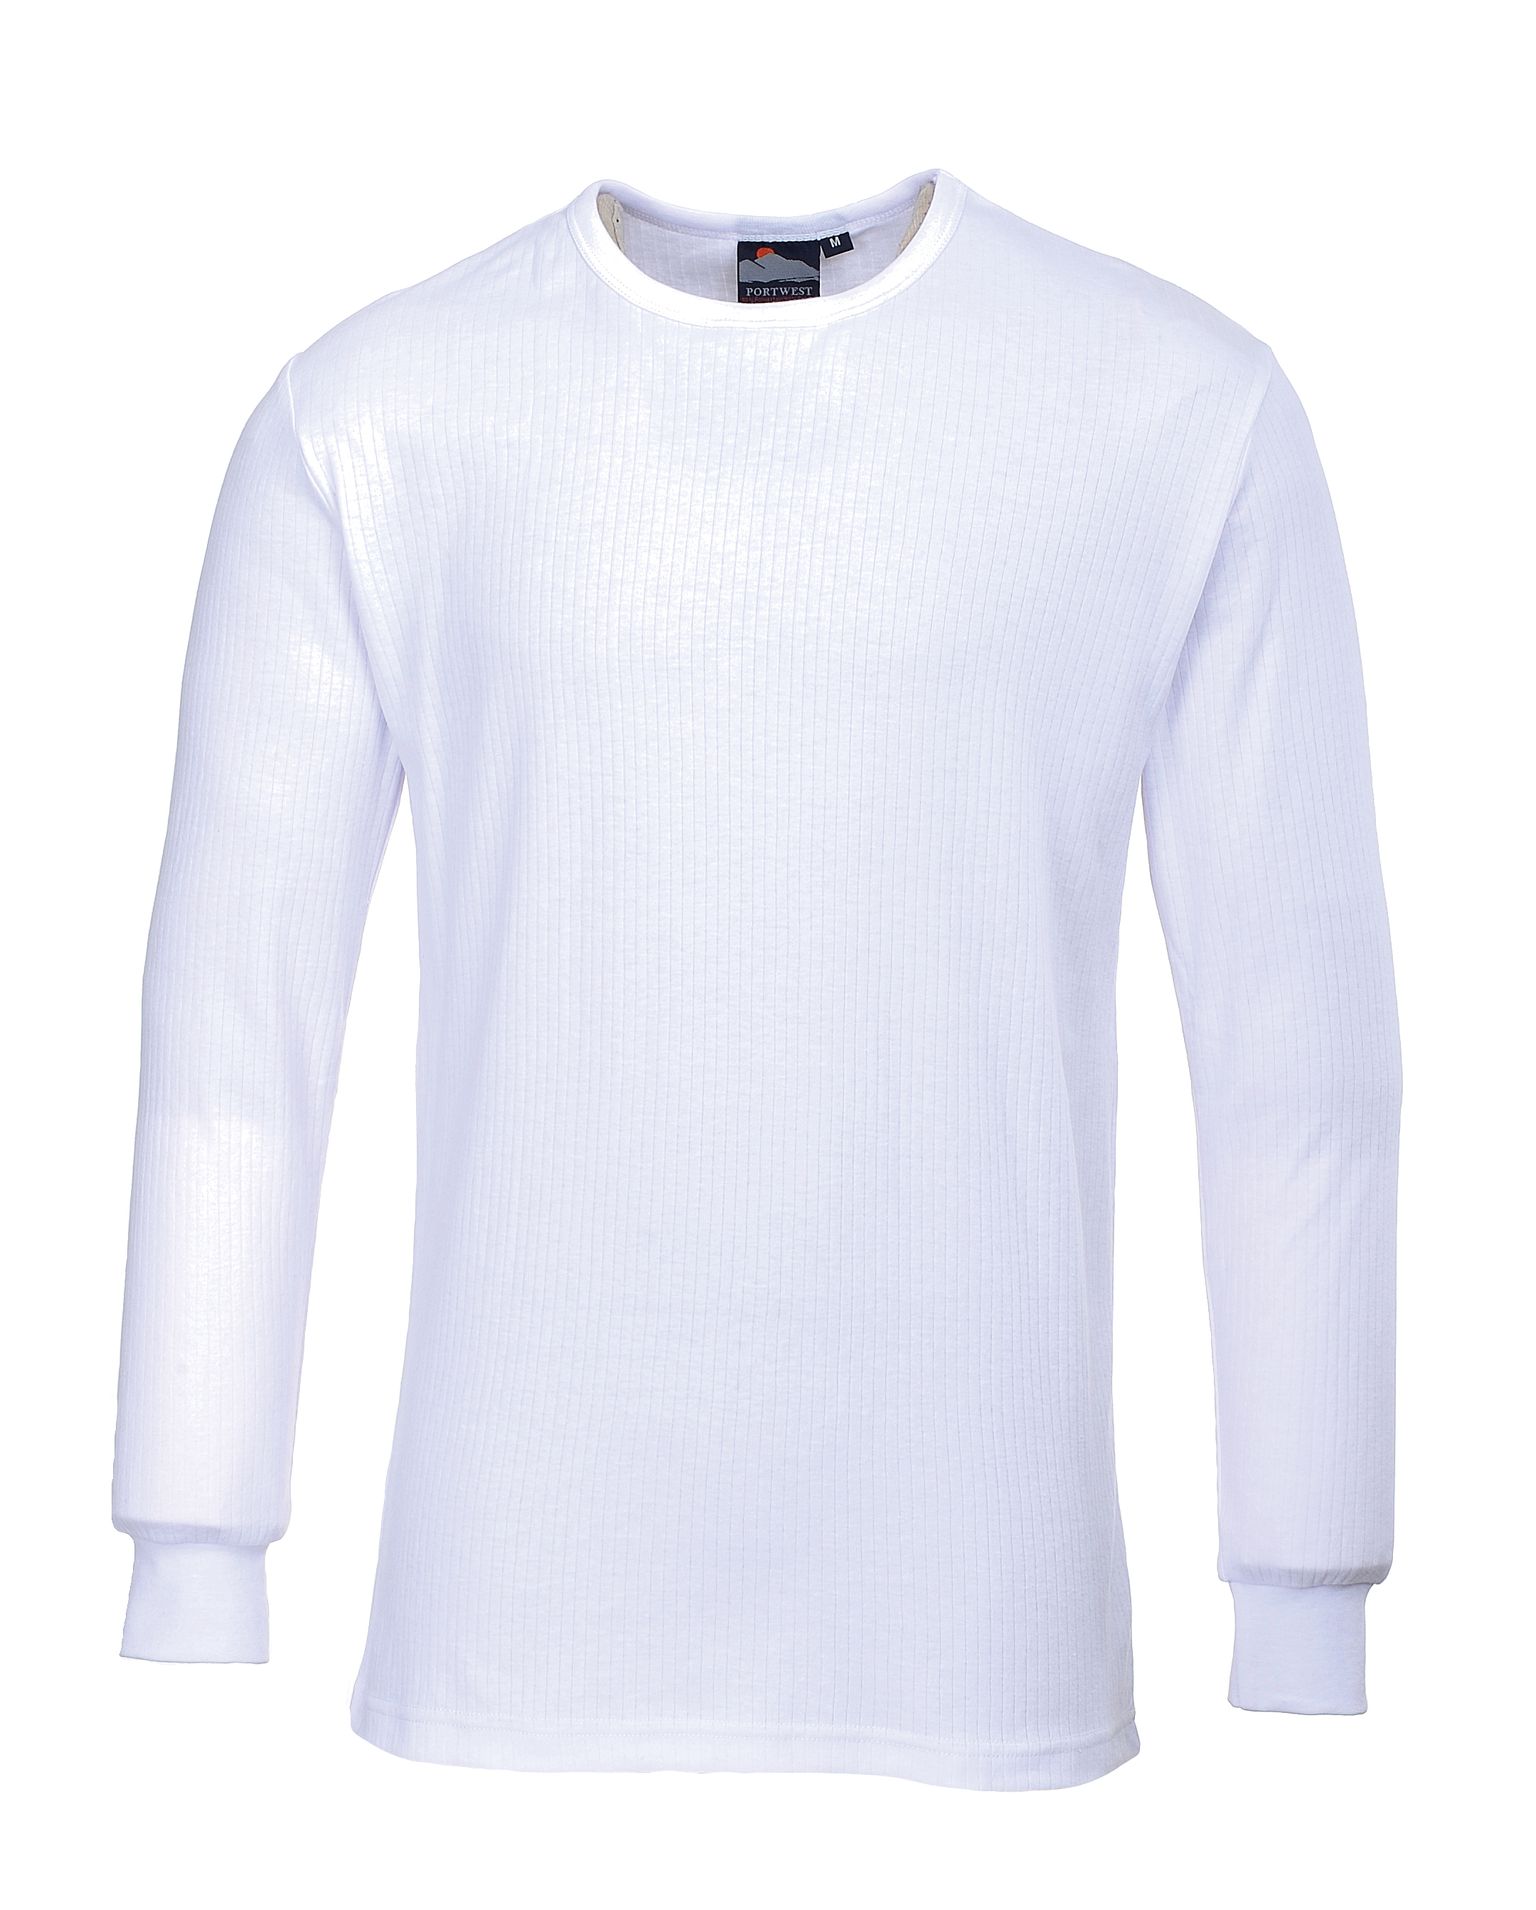 Thermal Long Sleeved T Shirt - White